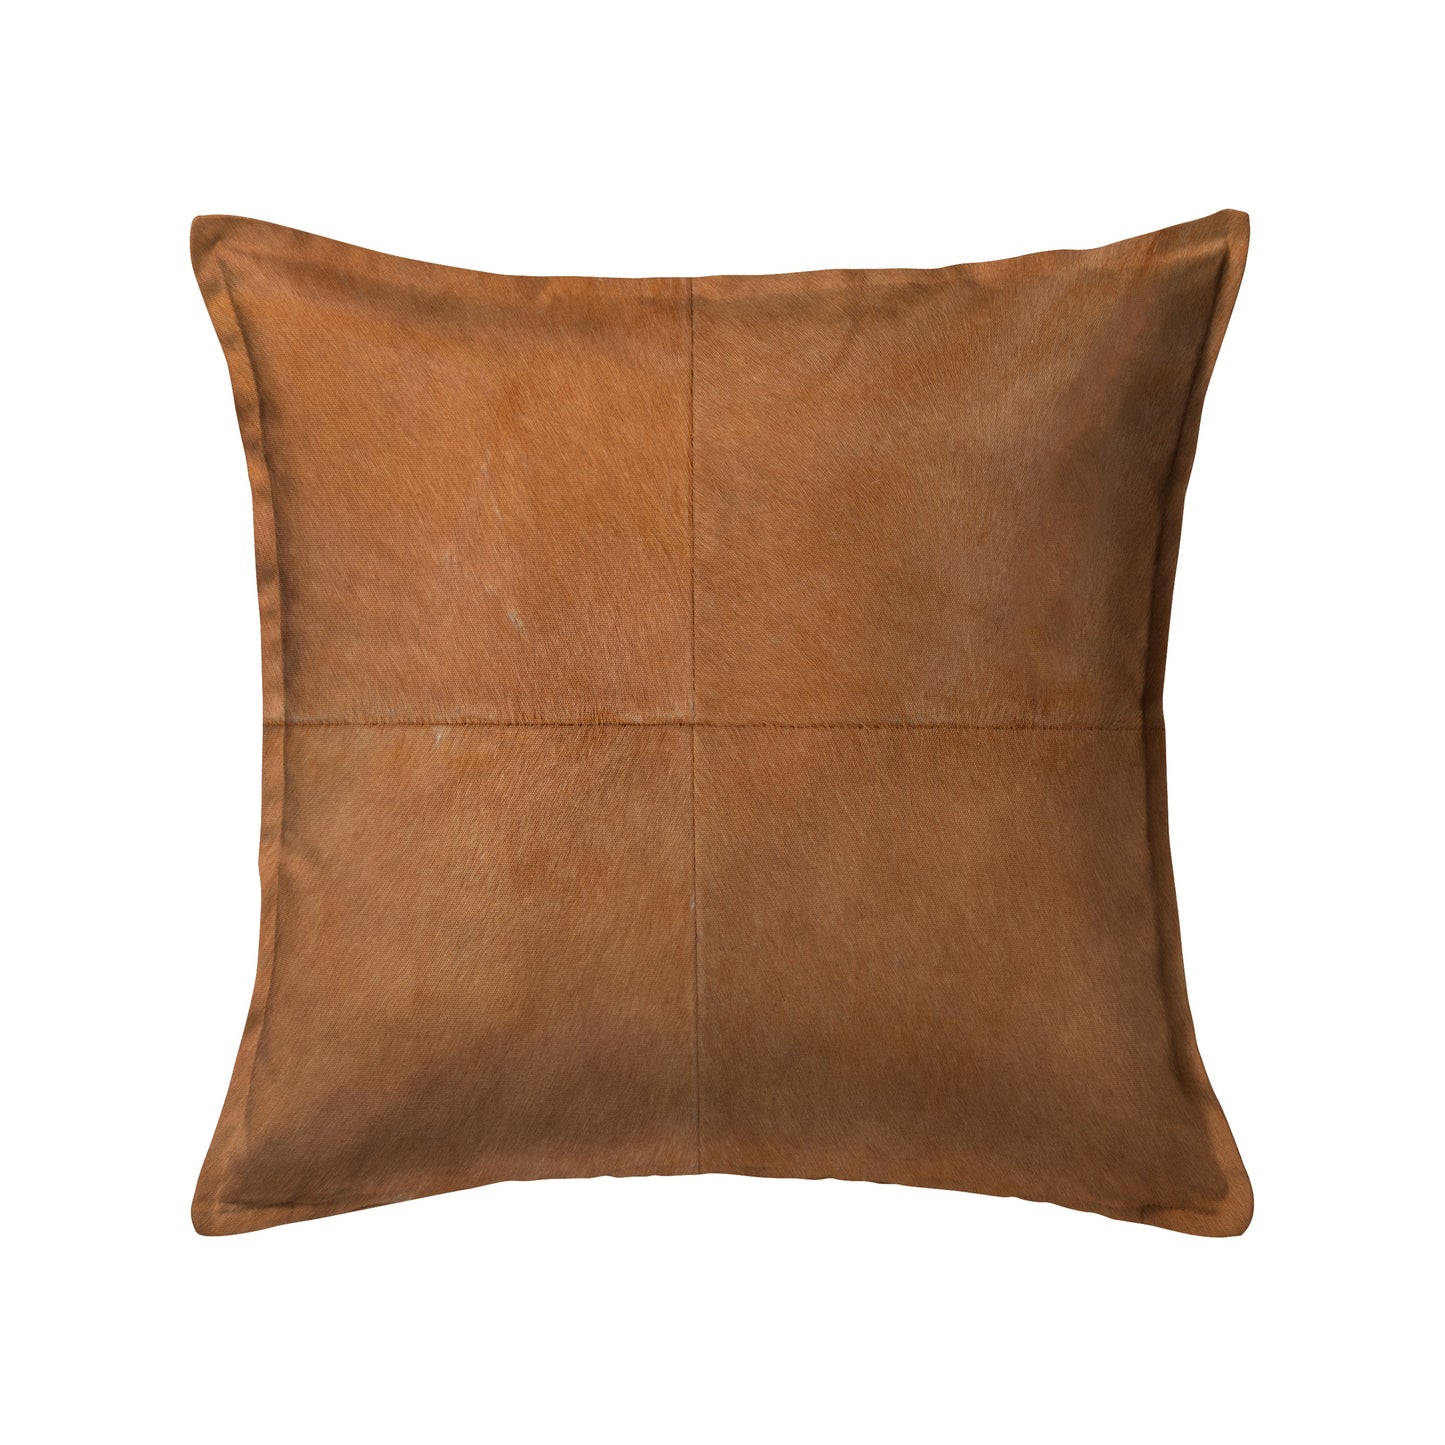 SWHF Solid Leather Cushion Cover 18" x 18" (Brown)